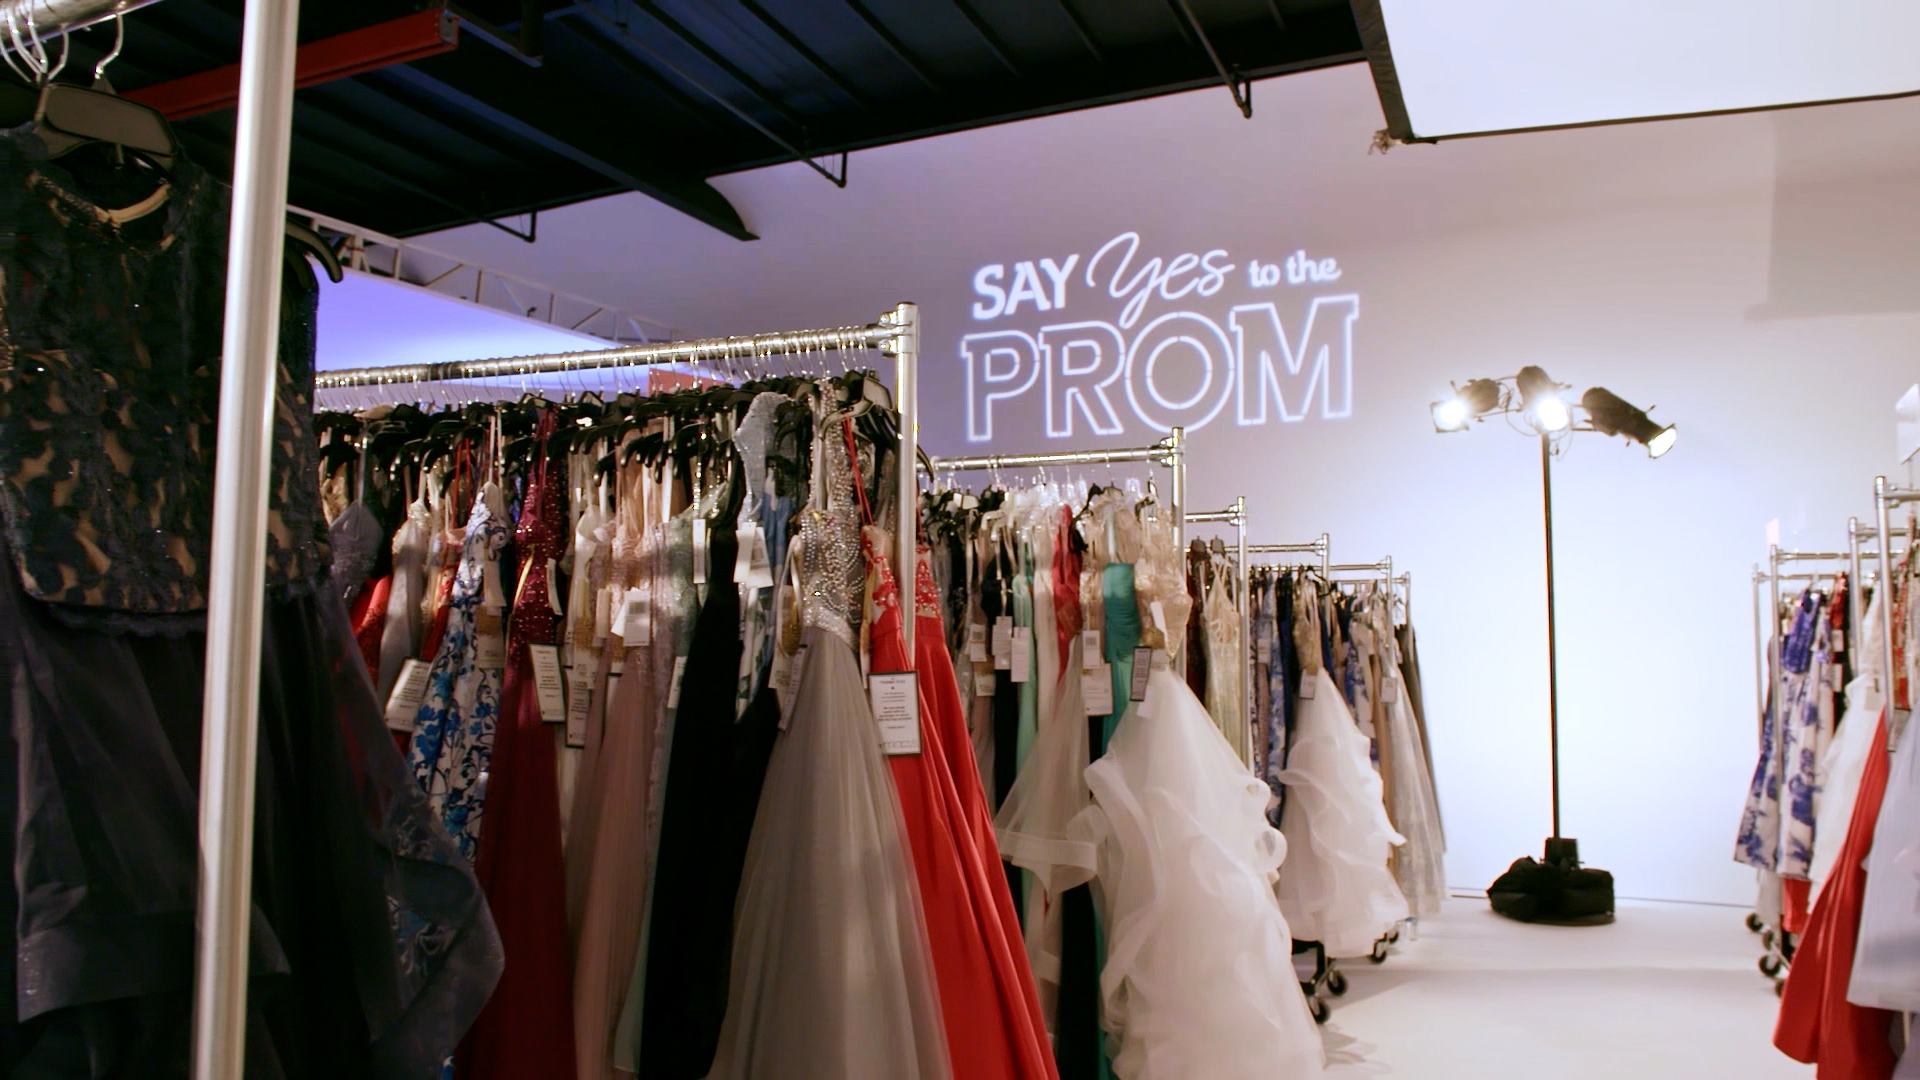 TLC's Say Yes to the Prom | TLC.com